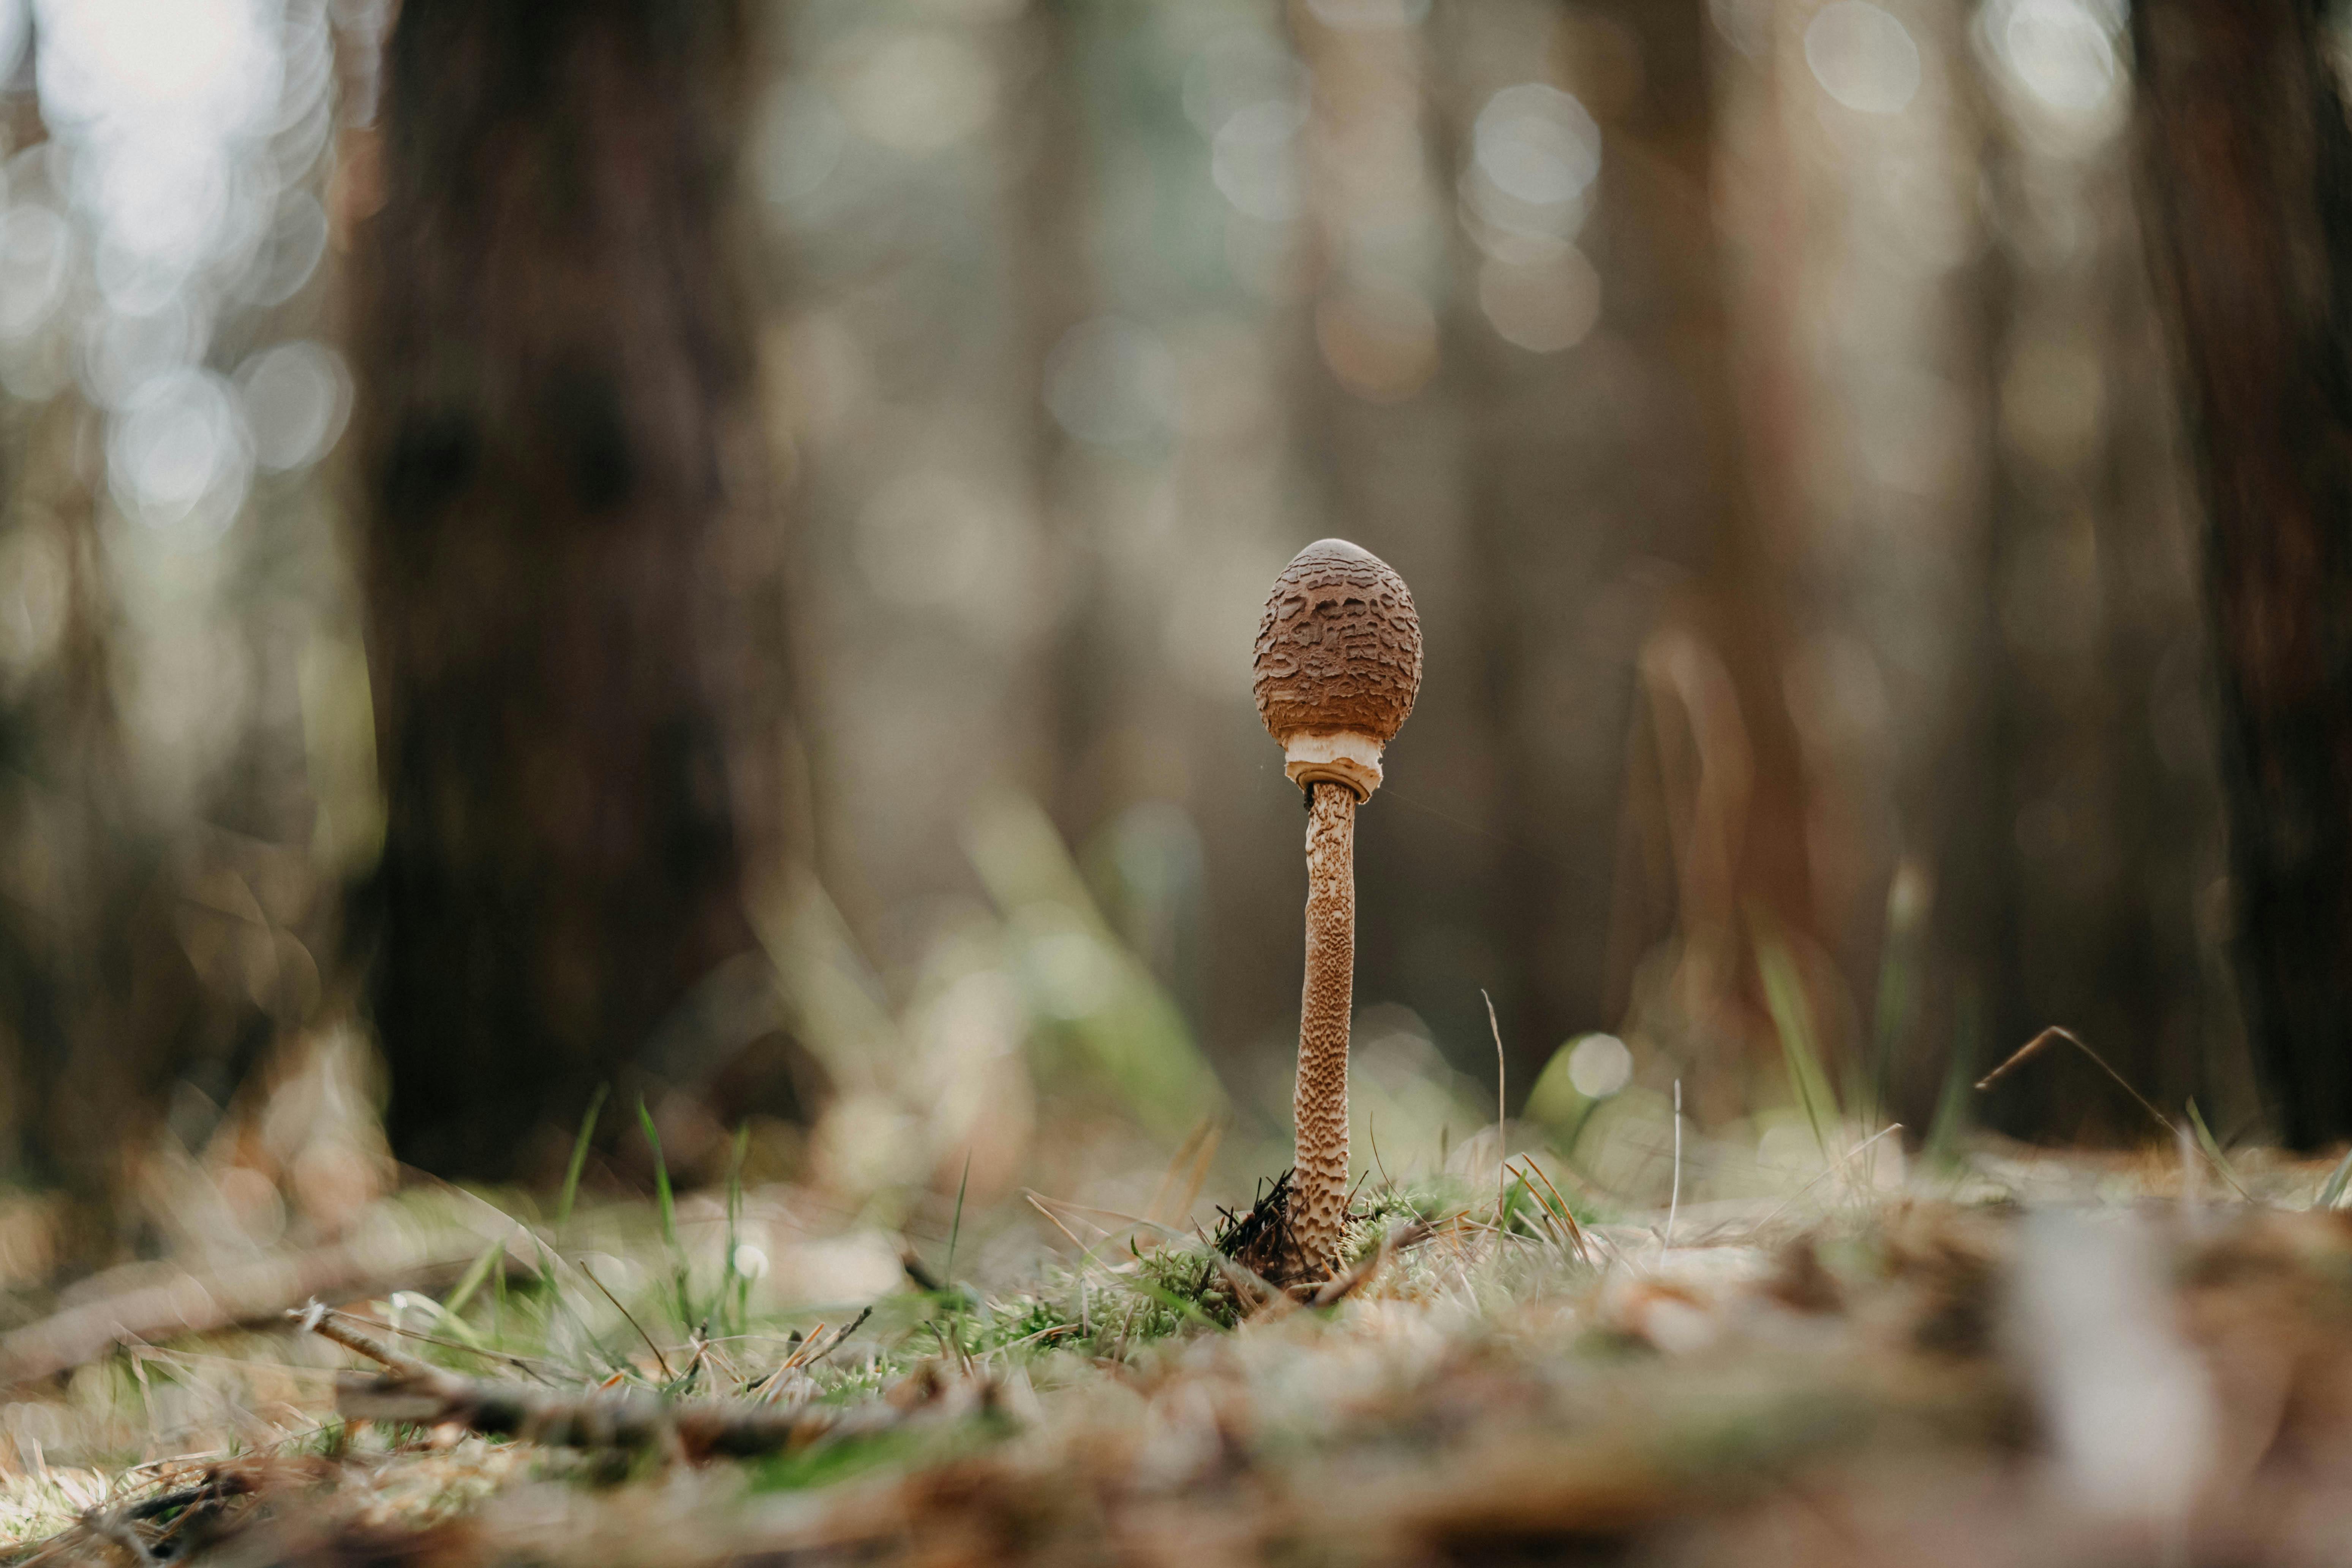 a mushroom in a forest